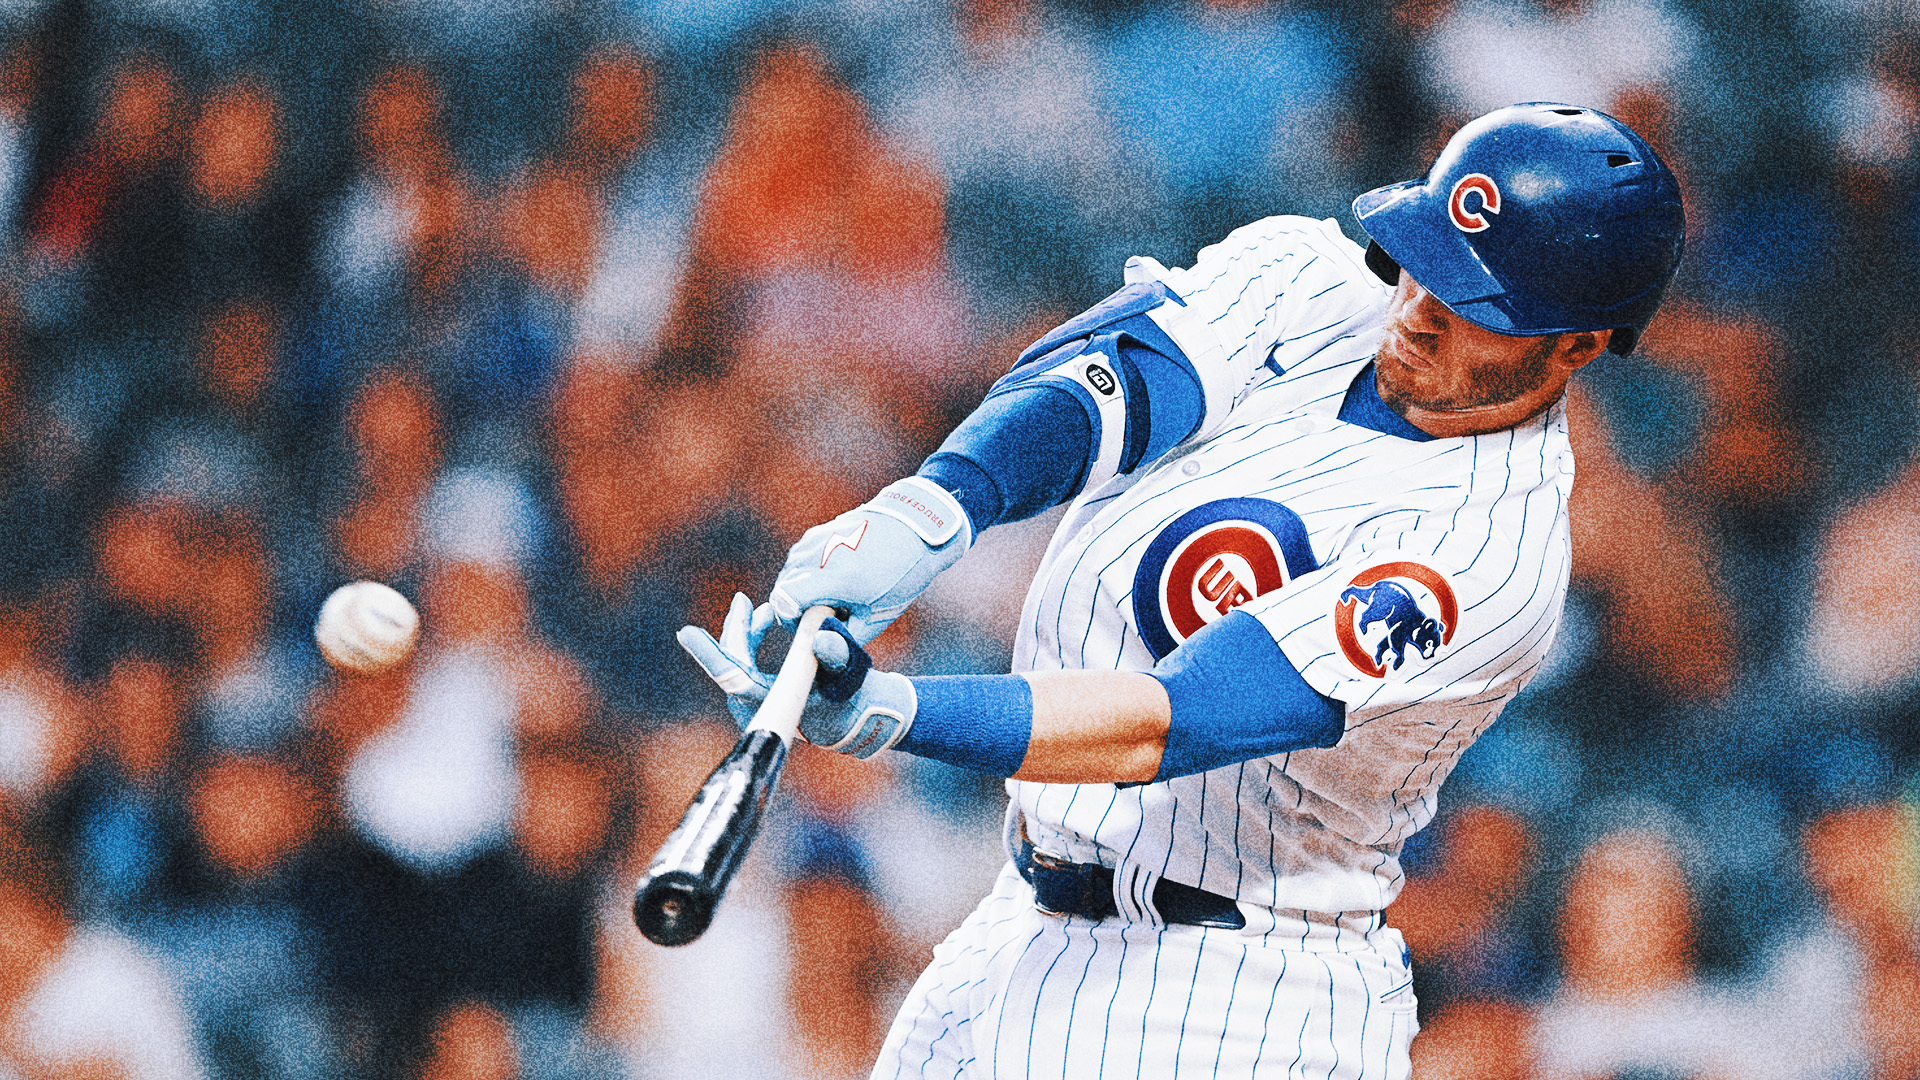 Cubs fortify new core with Ian Happ extension. Can he lead their next great team?